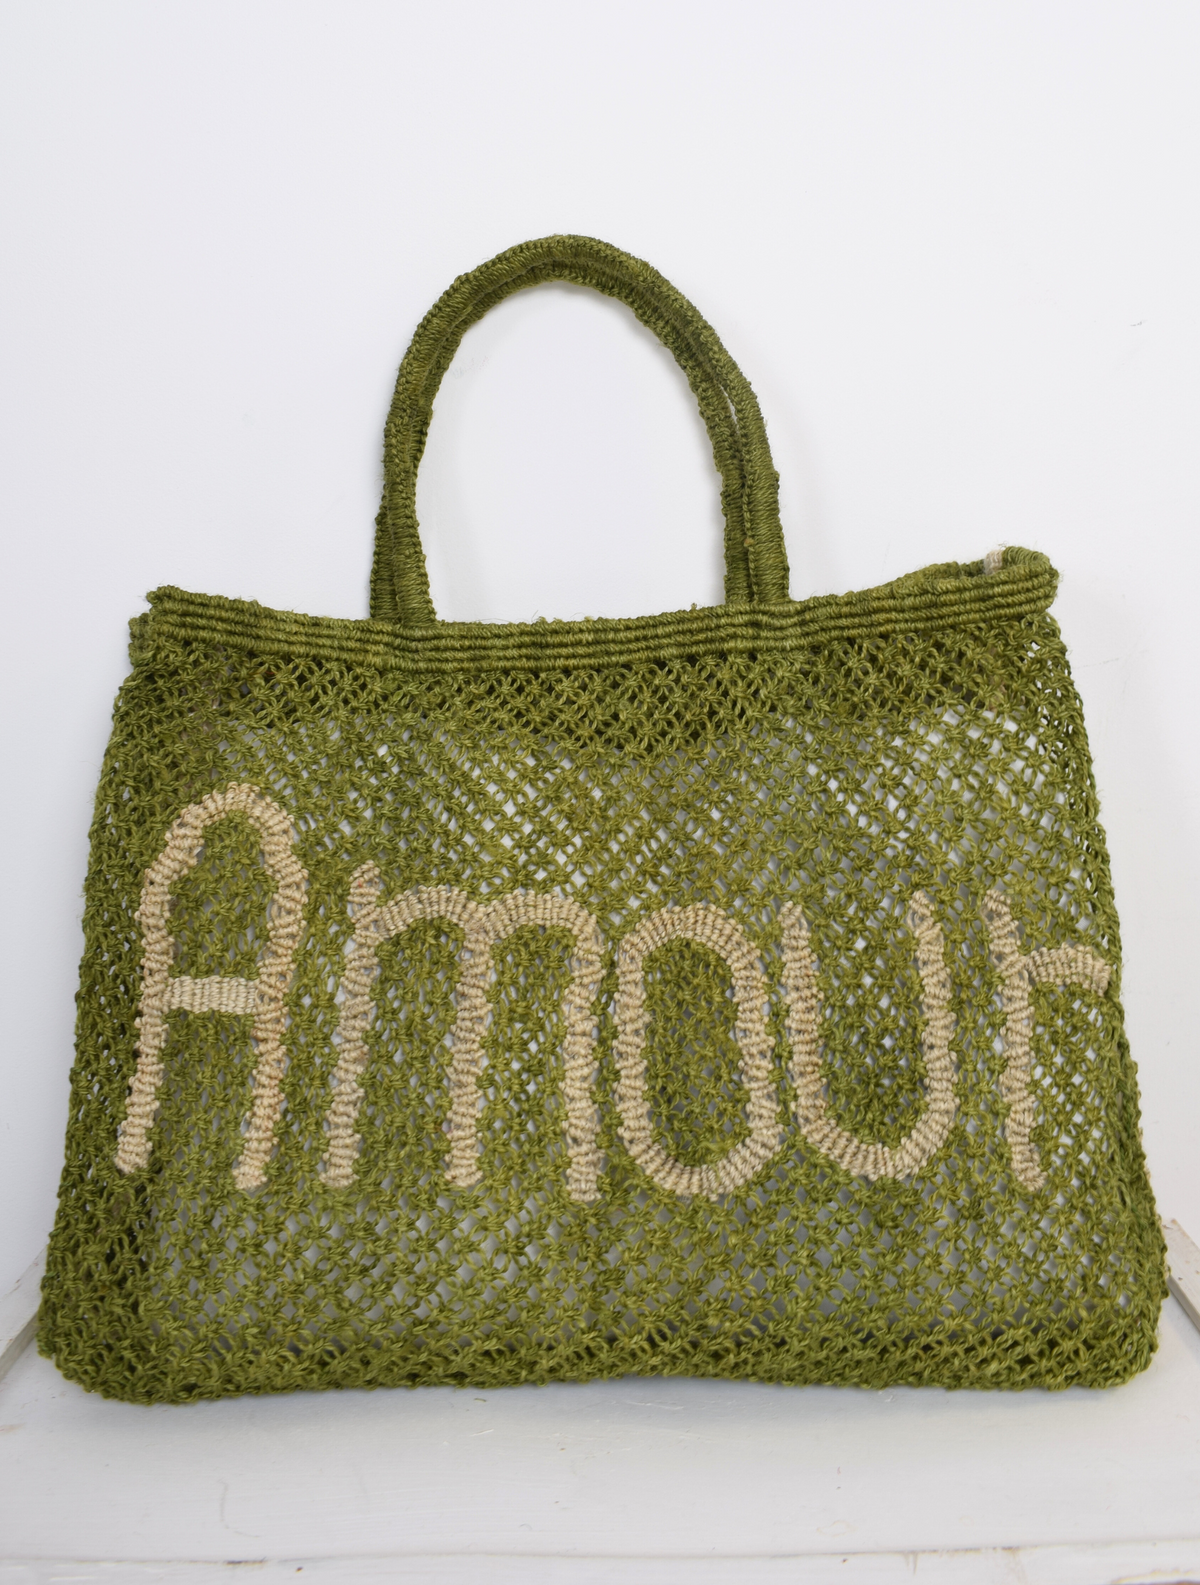 Green woven bag with nude "amour" writing